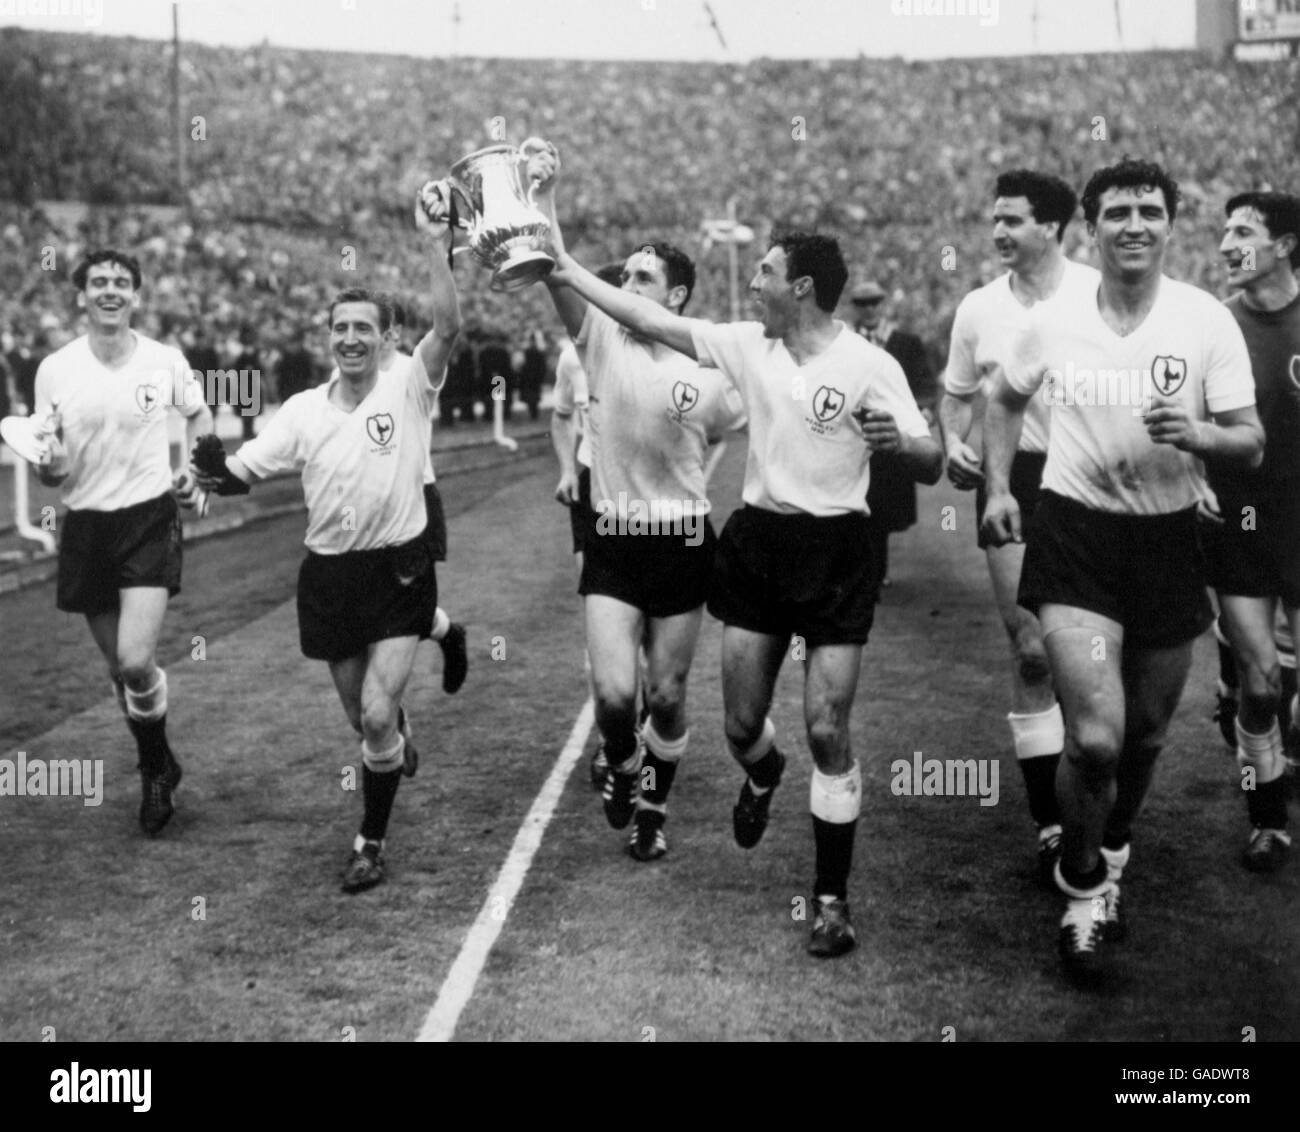 (L-R) The triumphant Tottenham Hotspur team parade the FA Cup around Wembley: Ron Henry, Cliff Jones, Dave Mackay, Jimmy Greaves, Maurice Norman, Bobby Smith, Bill Brown Stock Photo